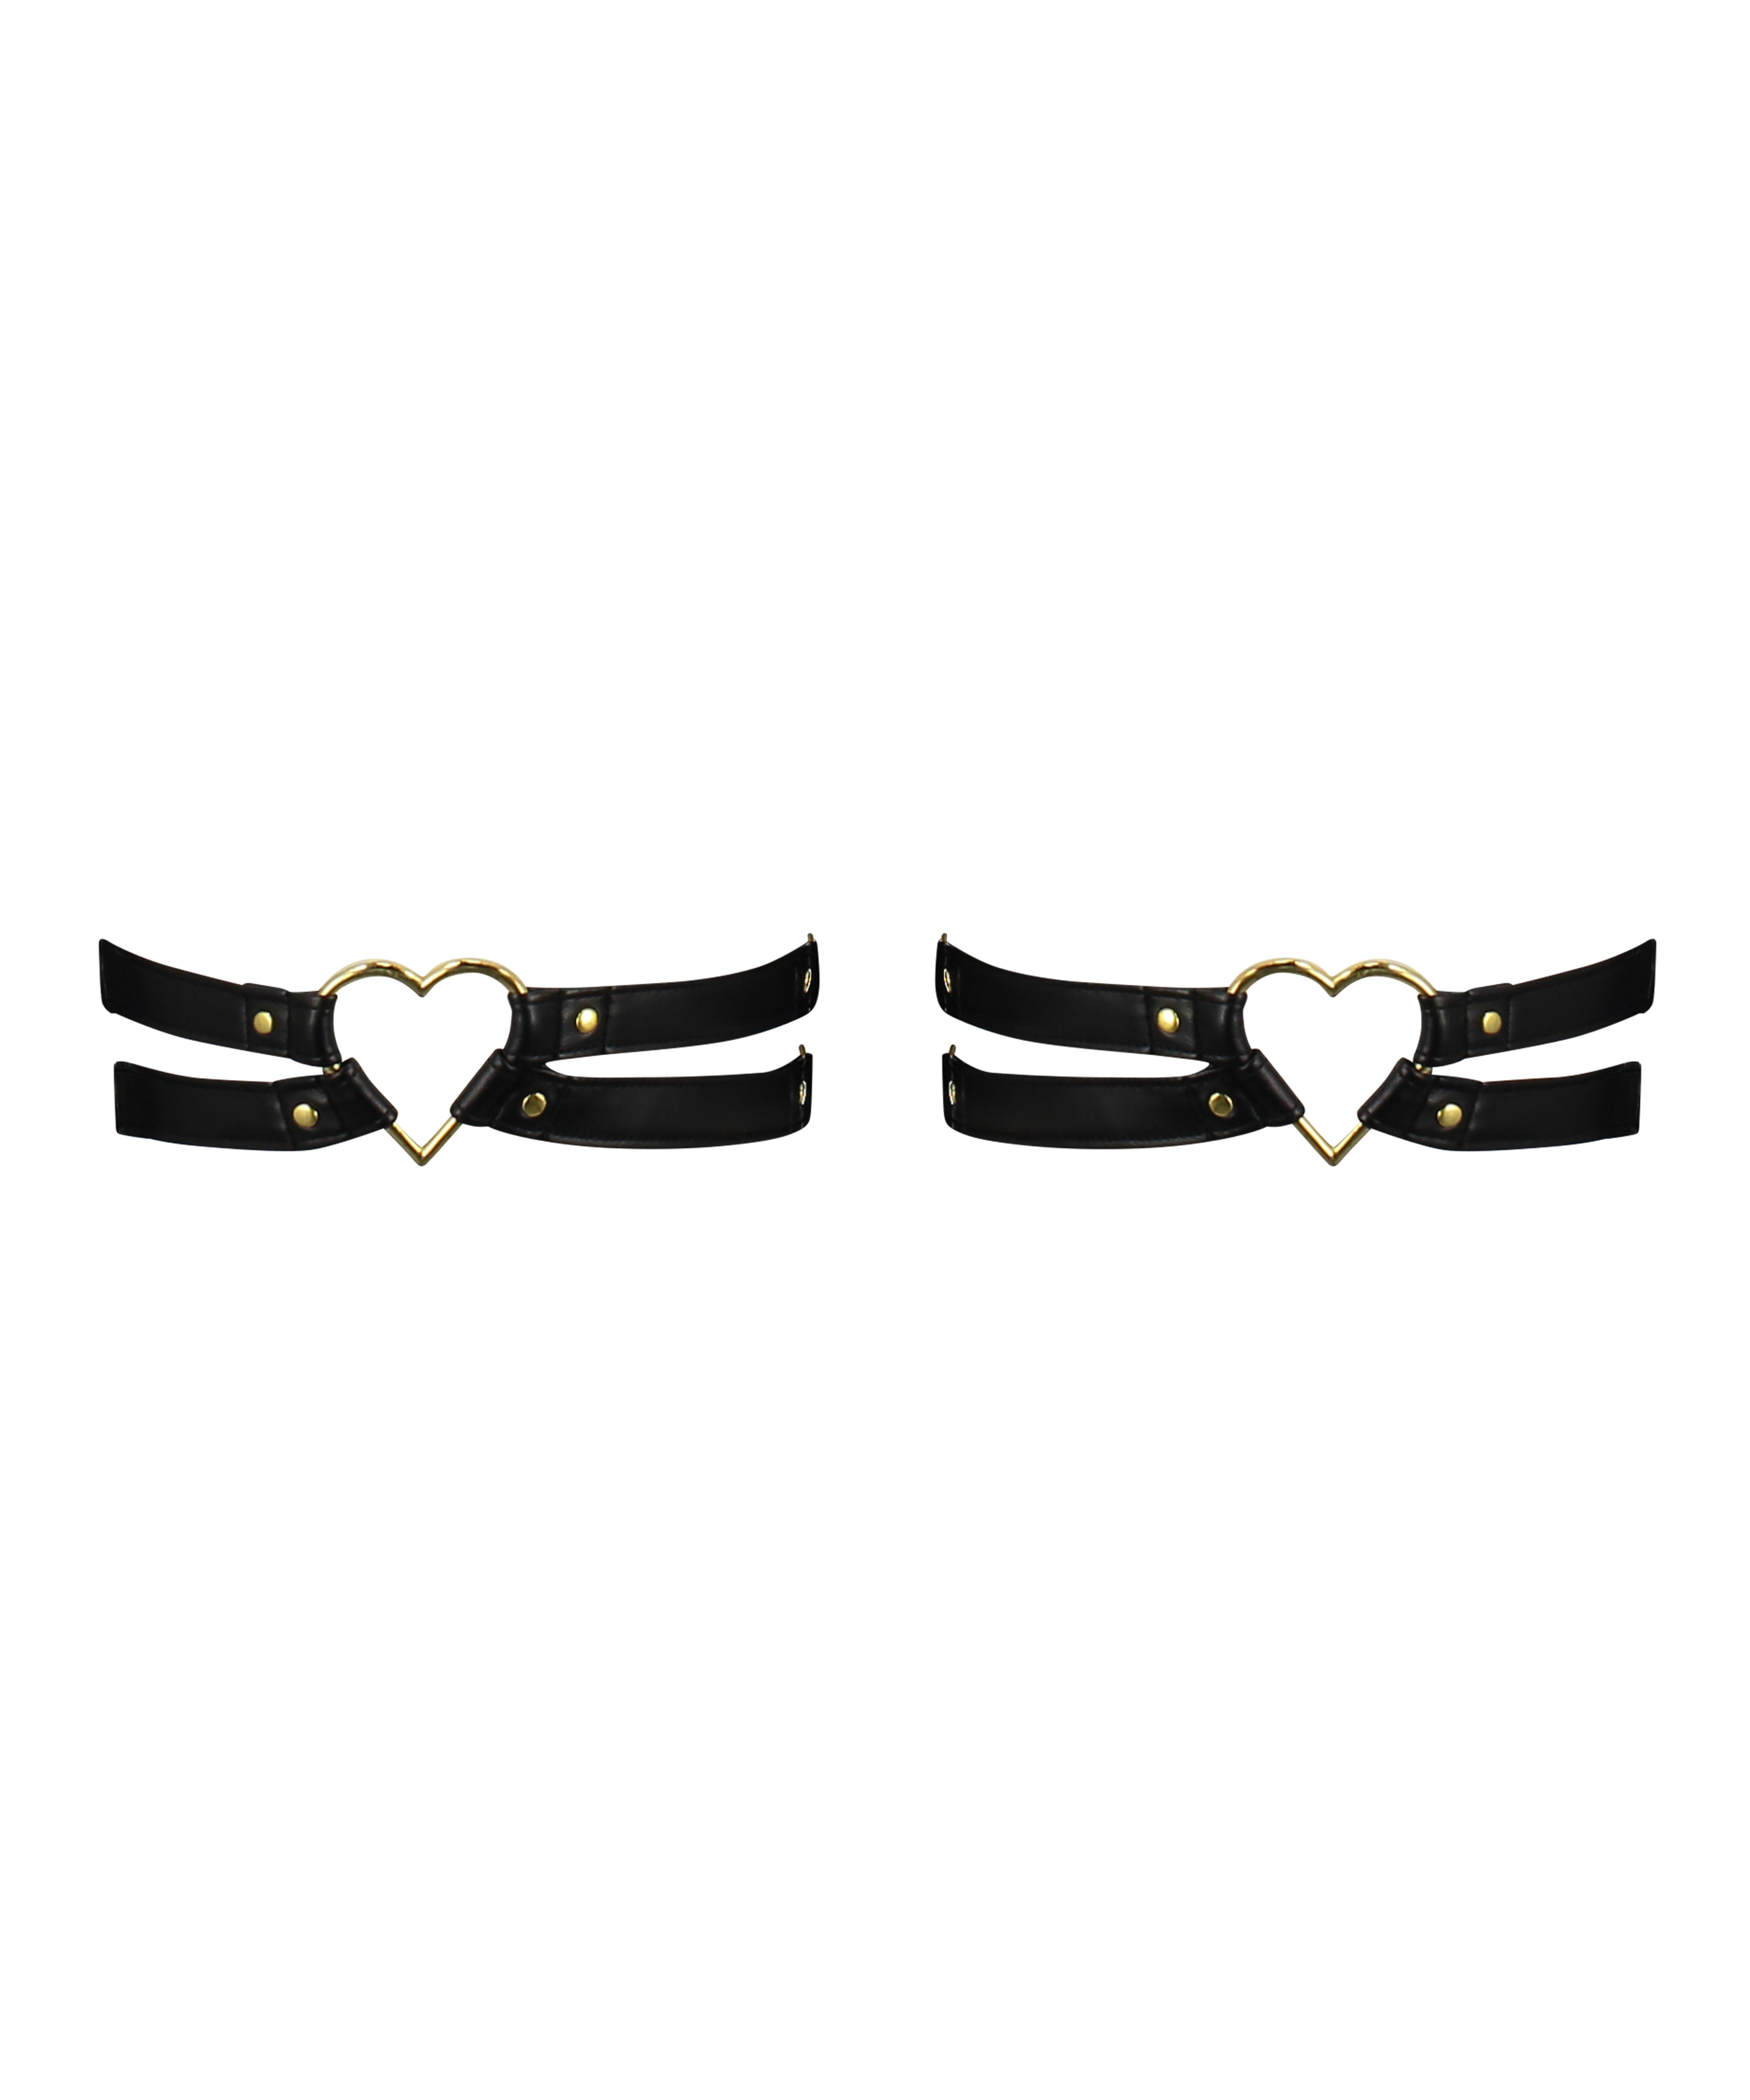 Heart Private Hold Up Suspenders, Black, main